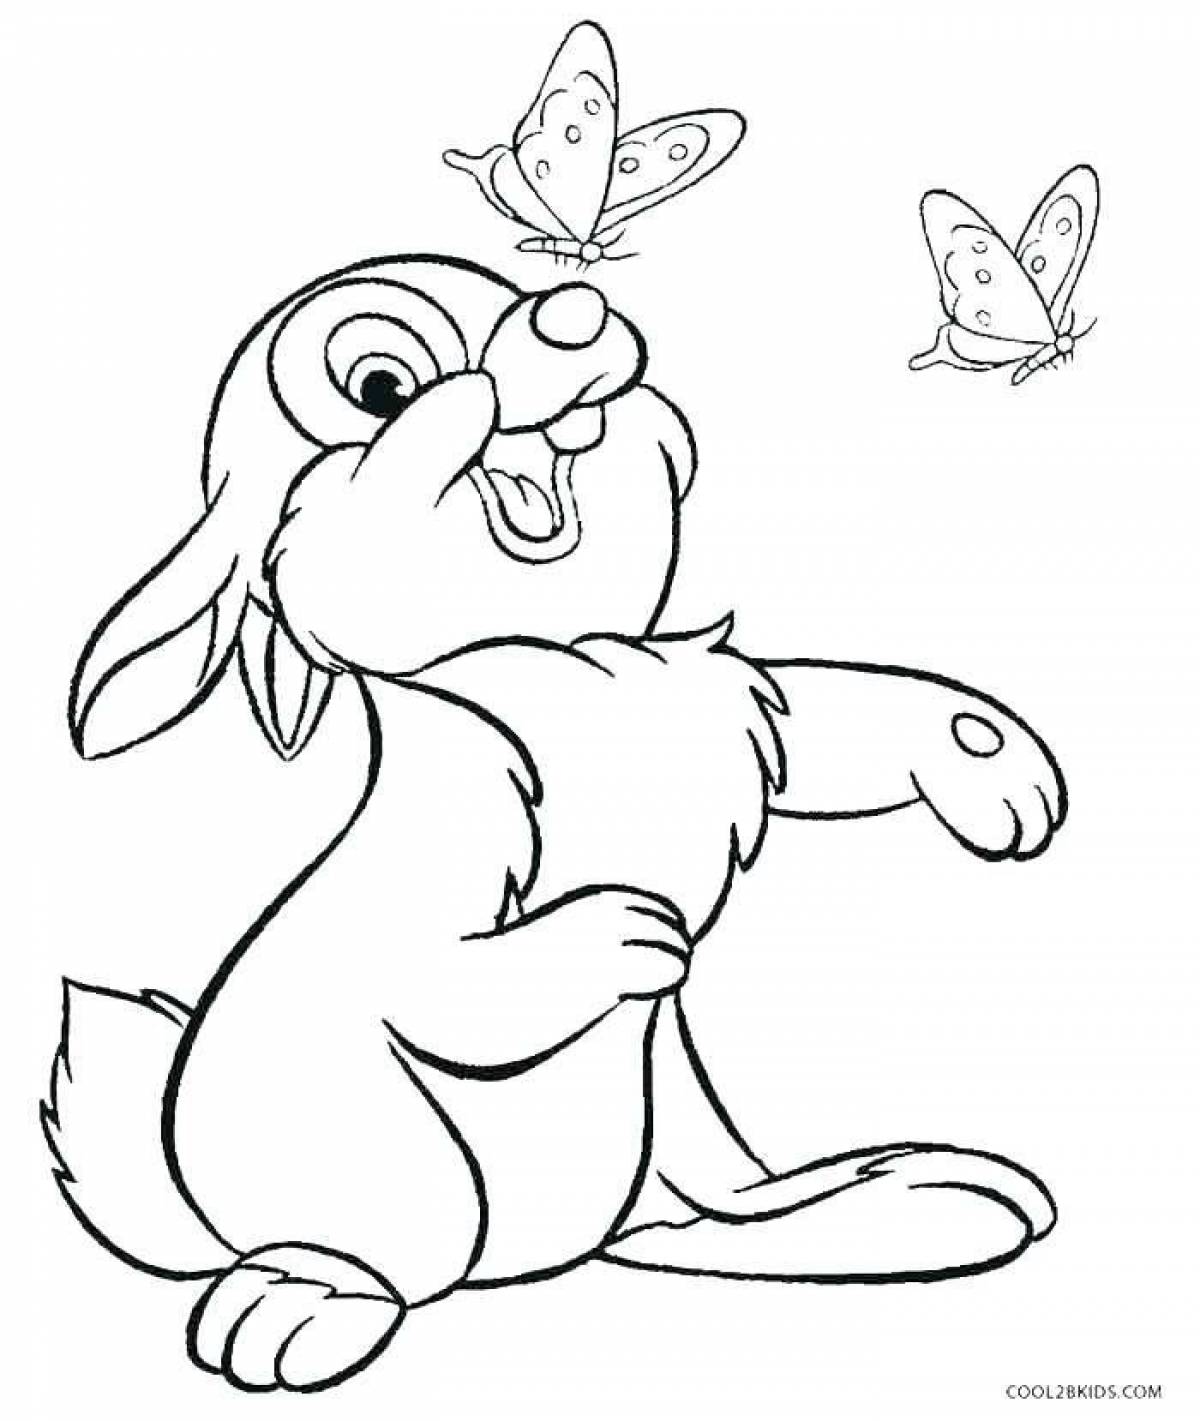 Bright coloring hare for children